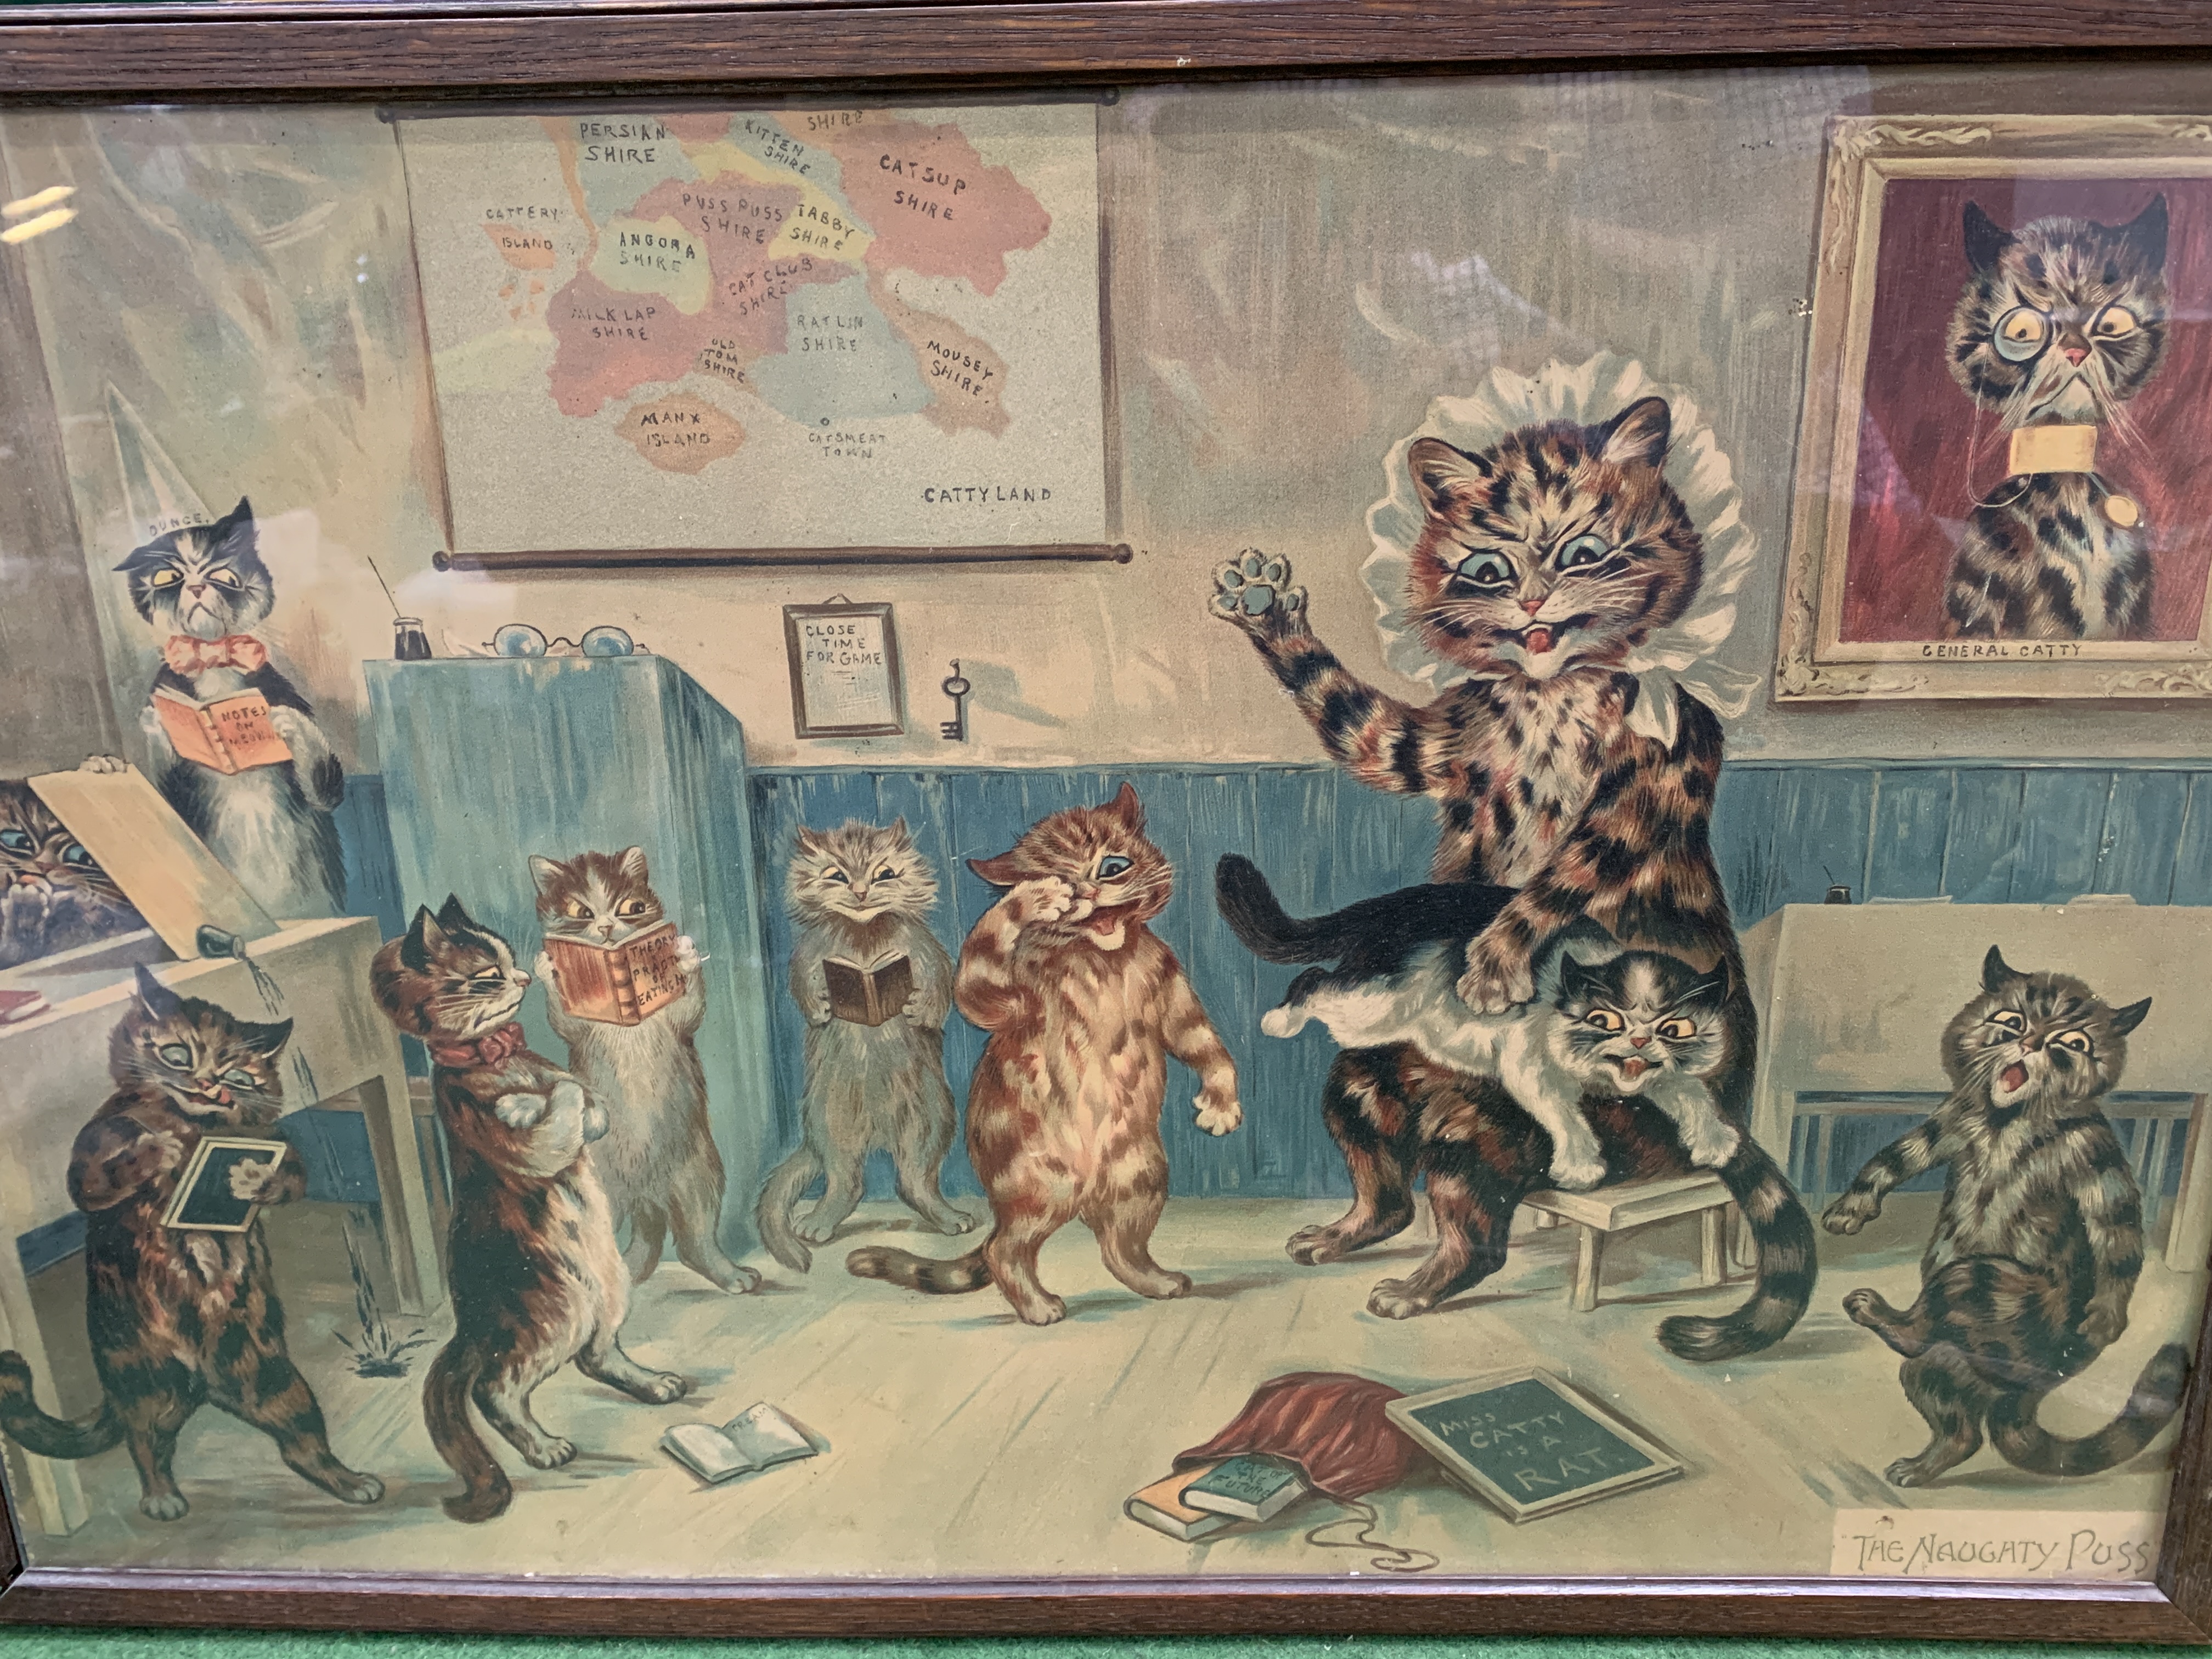 Framed and glazed Louis Wain print "The Naughty Puss"